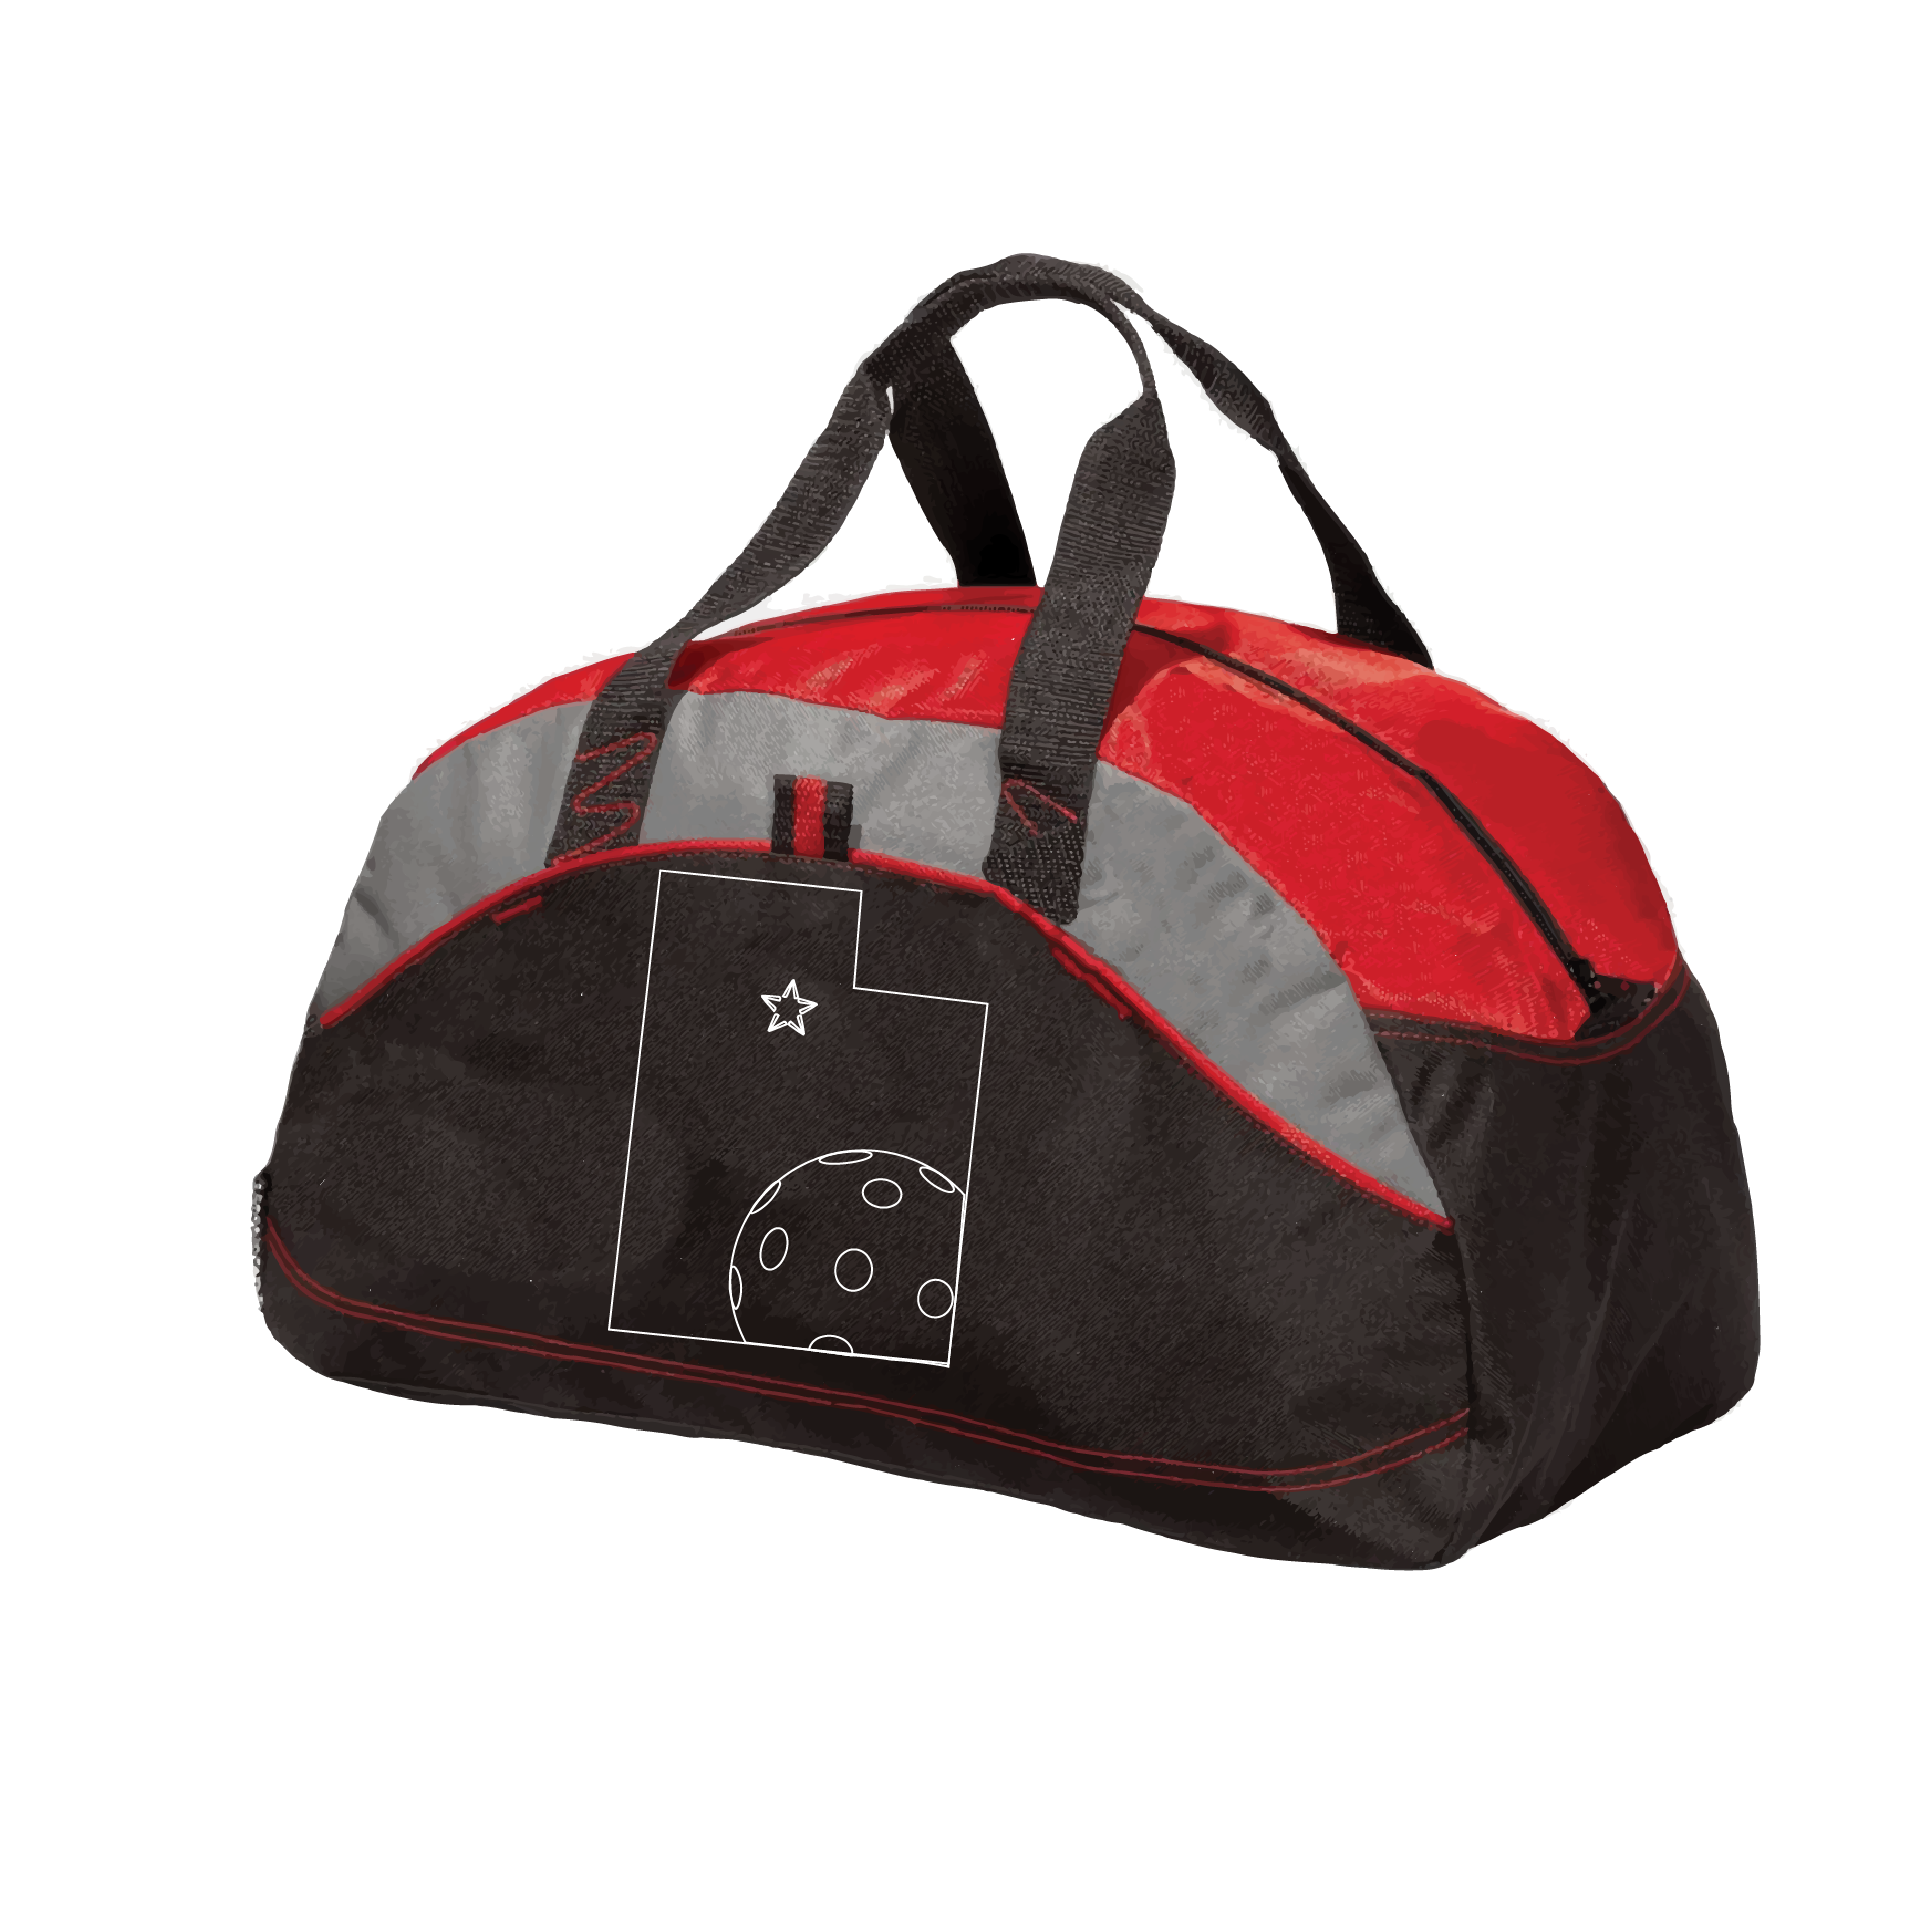 Pickleball Duffel Bag Design: Utah with Ball  Carry your gear in comfort and style. This fun pickleball duffel bag is the perfect accessory for all pickleball players needing to keep their gear in one place. This medium sized duffel tote is ideal for all your pickleball activities. The large center compartment allows for plenty of space and the mesh end pocket is perfect for holding a water bottle.